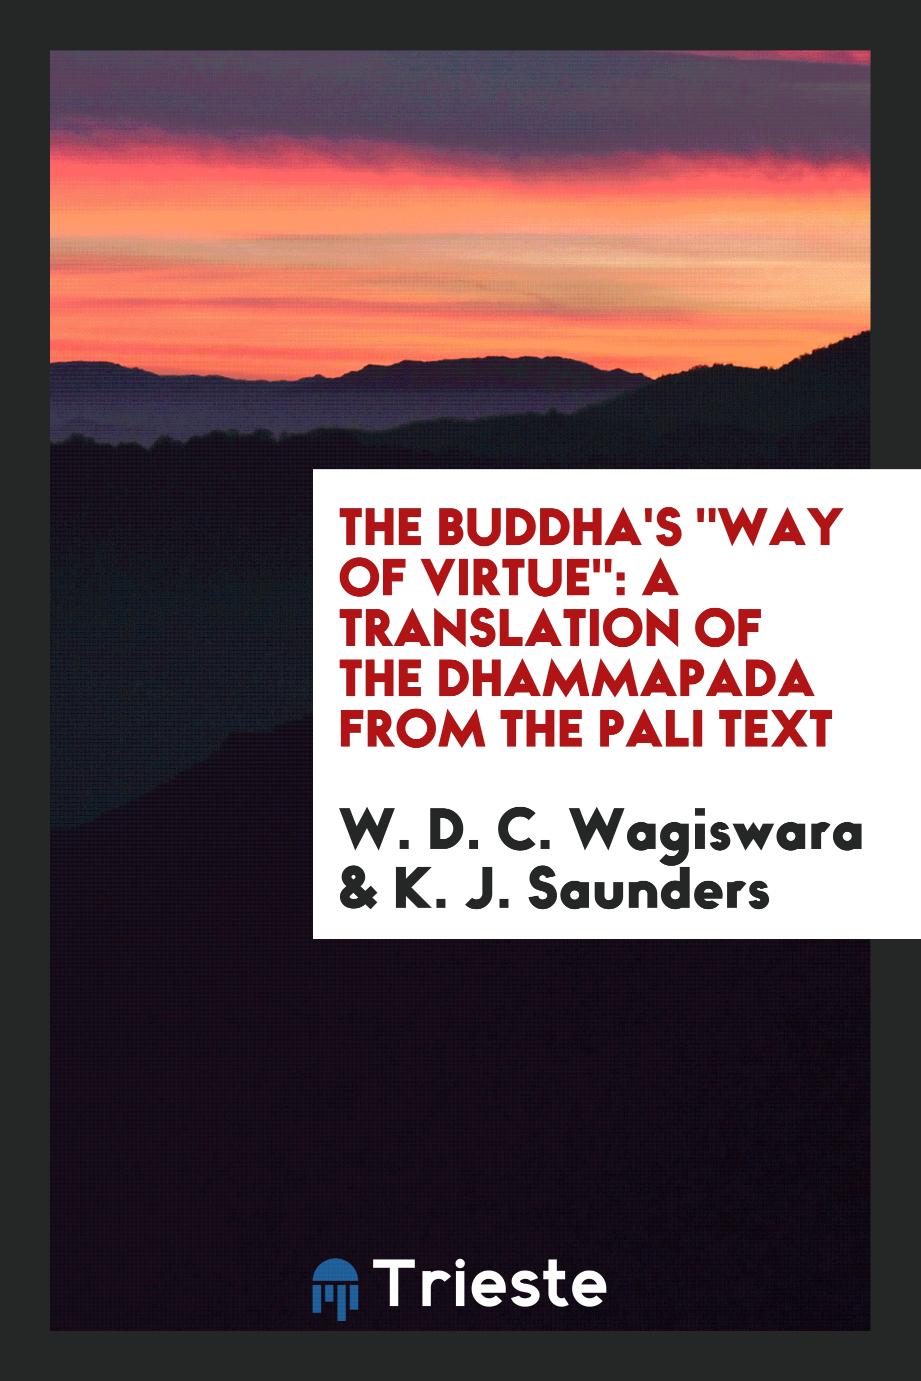 The Buddha's "Way of Virtue": A Translation of the Dhammapada from the Pali Text